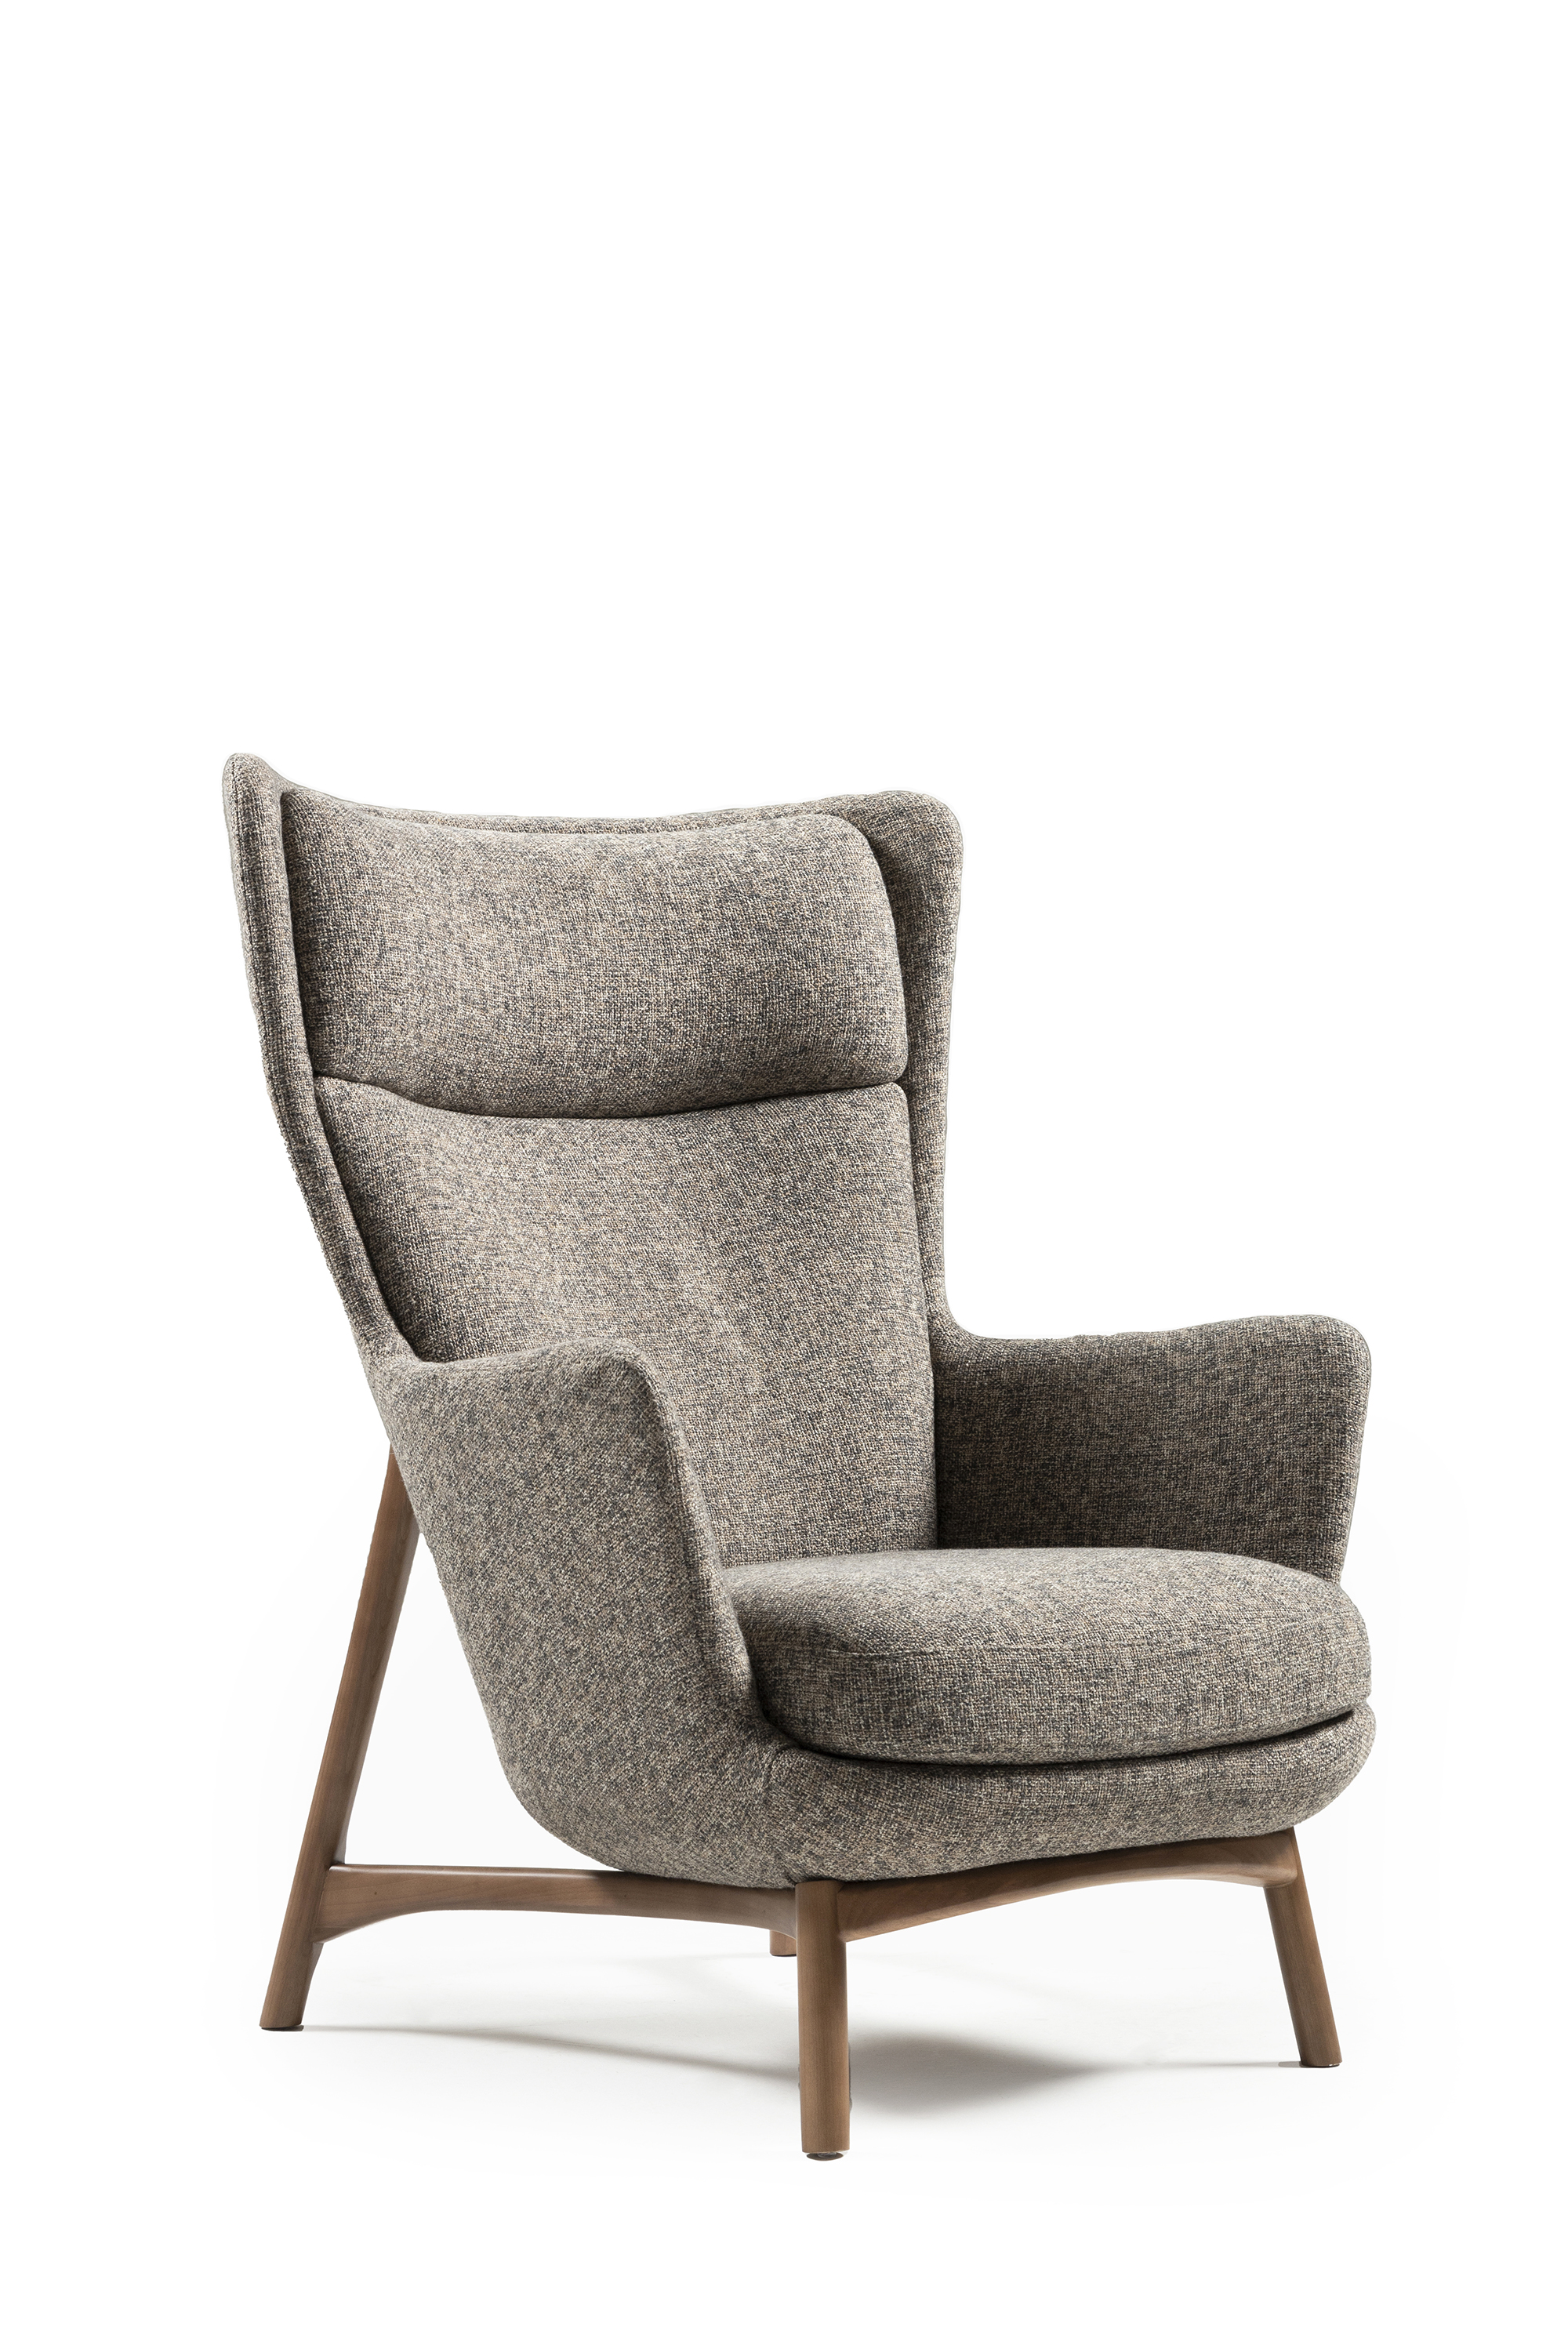 SUBLIME ARMCHAIRS